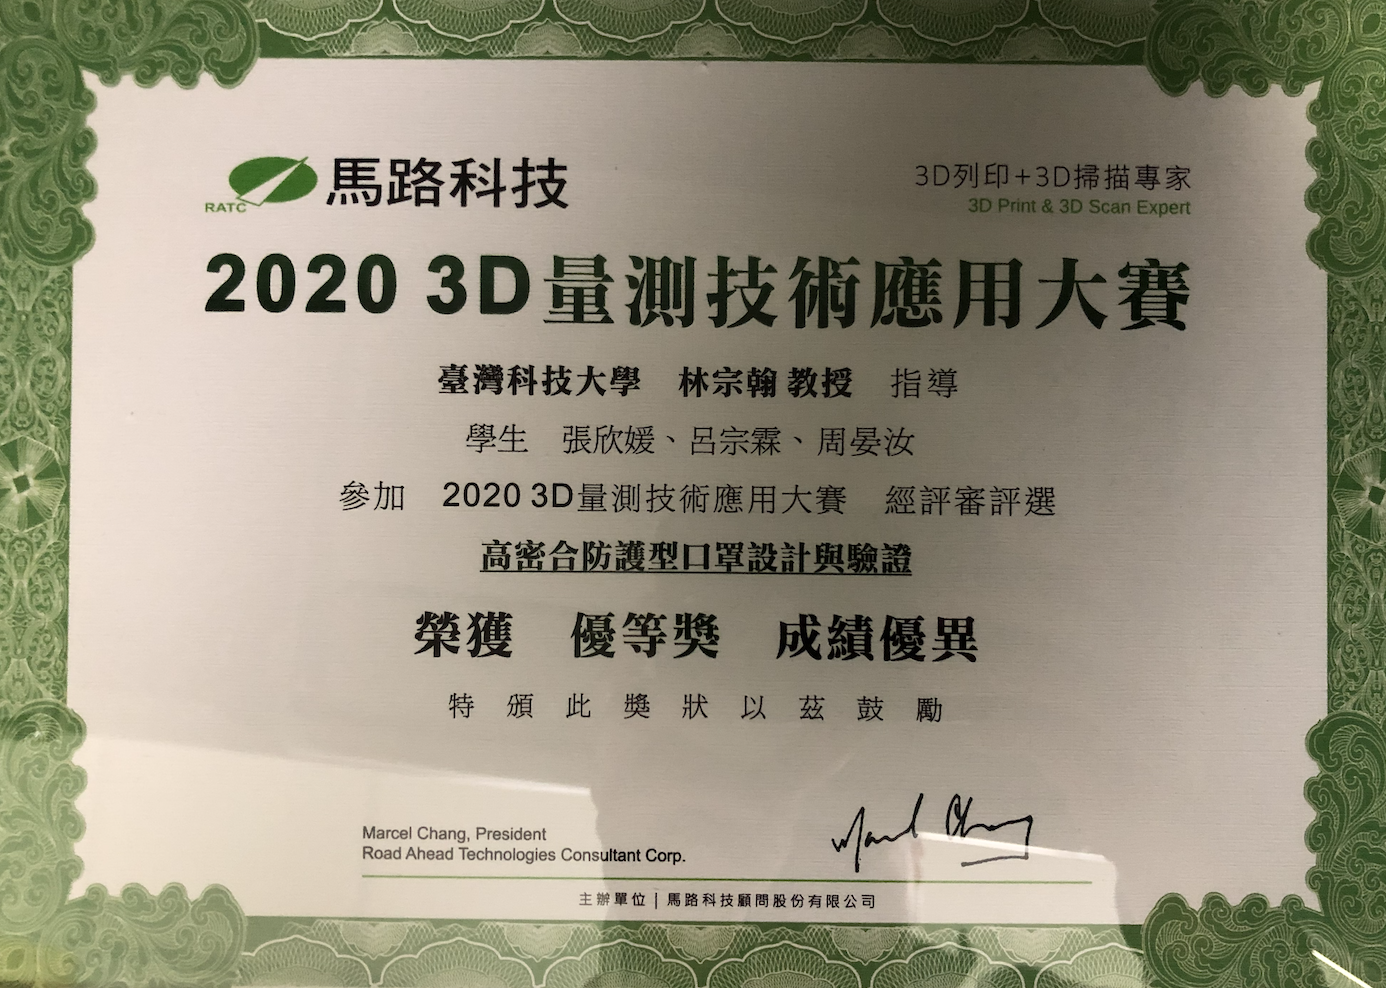 We win the award of 3D measurement technology and application 2020